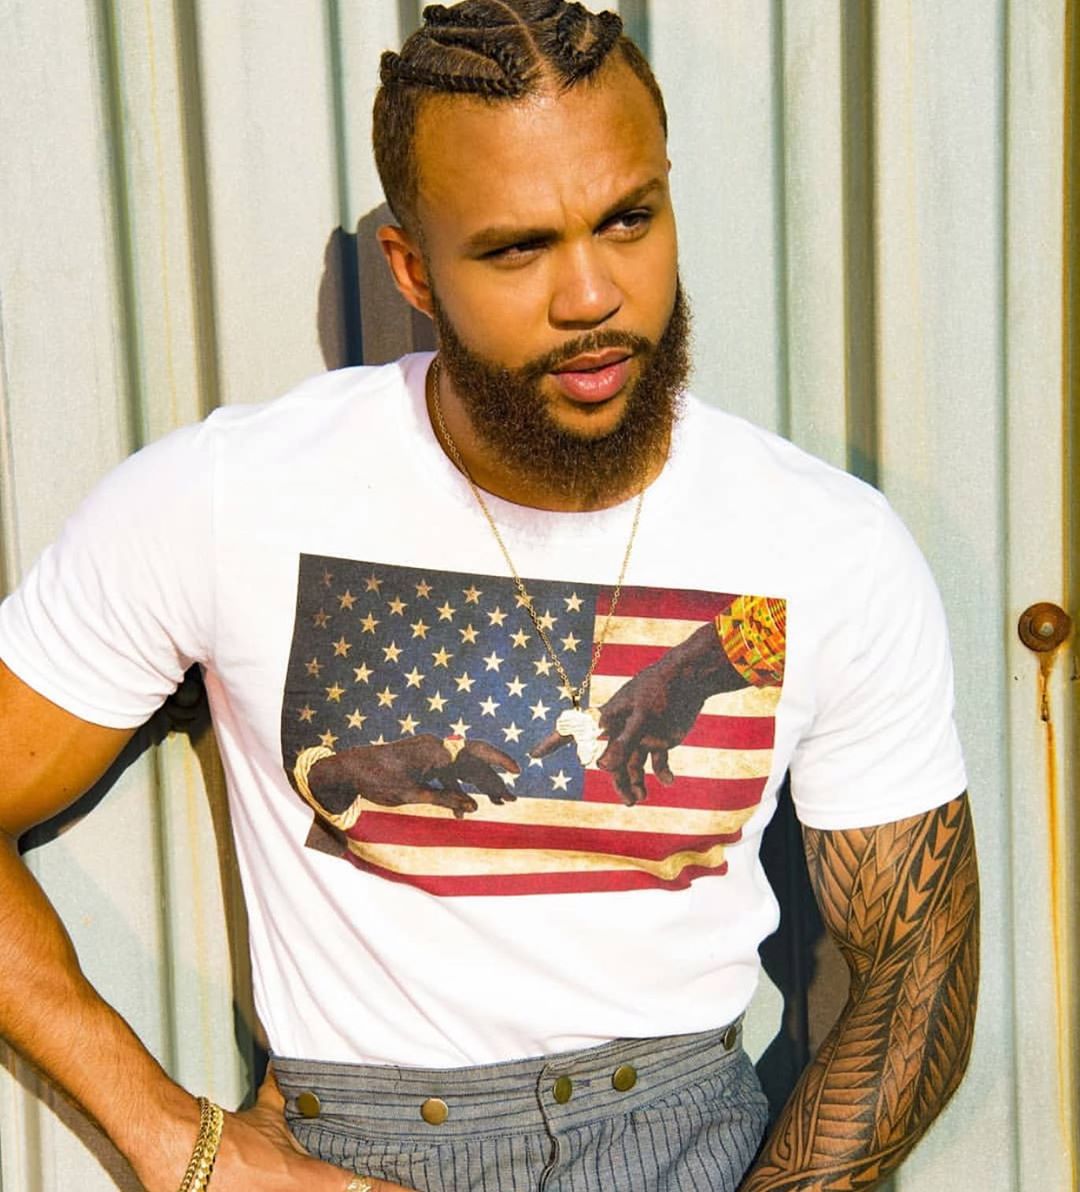 25b06c539525d9350c552c546c776cd8 - "There was never a time homosexuality didn't exist in Africa" - Jidenna